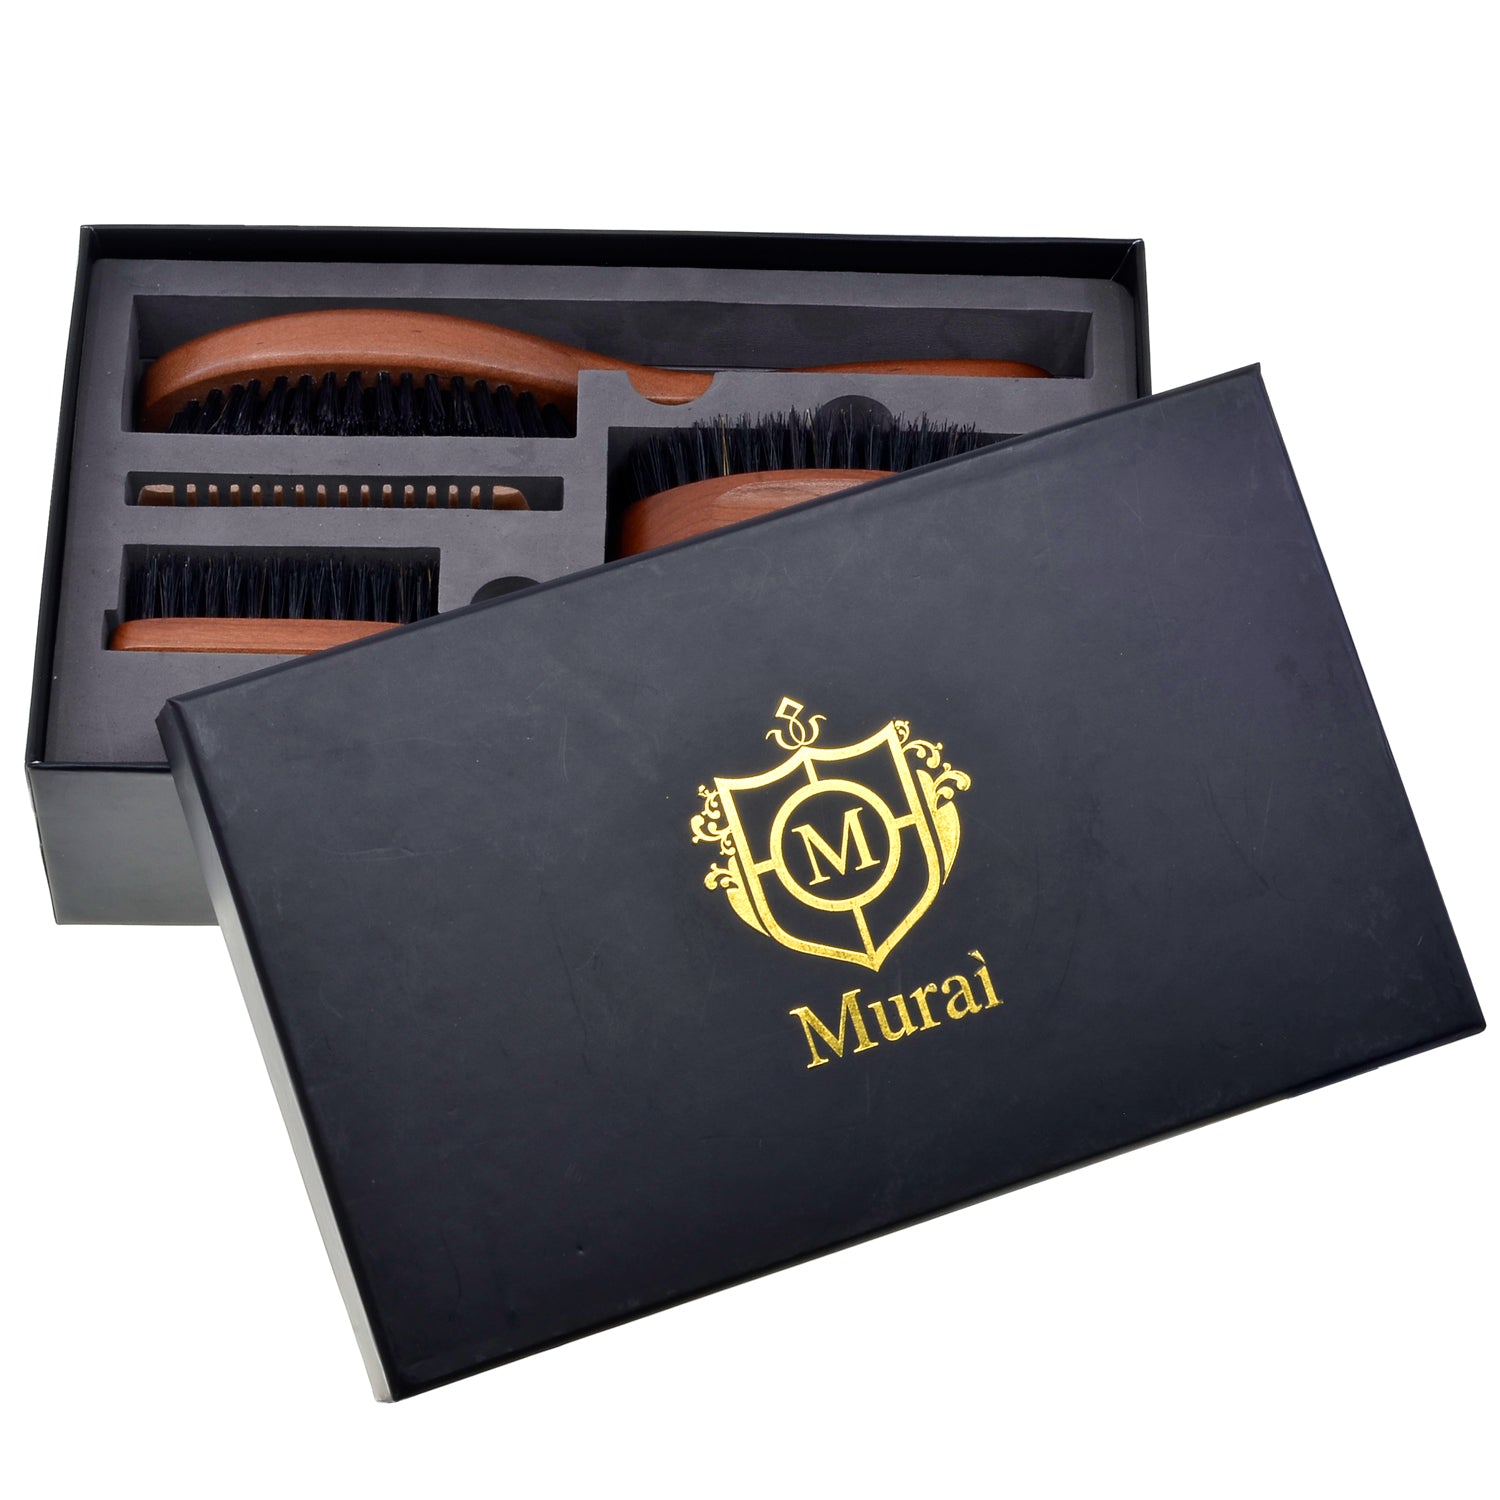 Murai by Giorgio GMK2 Men's Grooming Kit for Beard and Mustache Gift Set